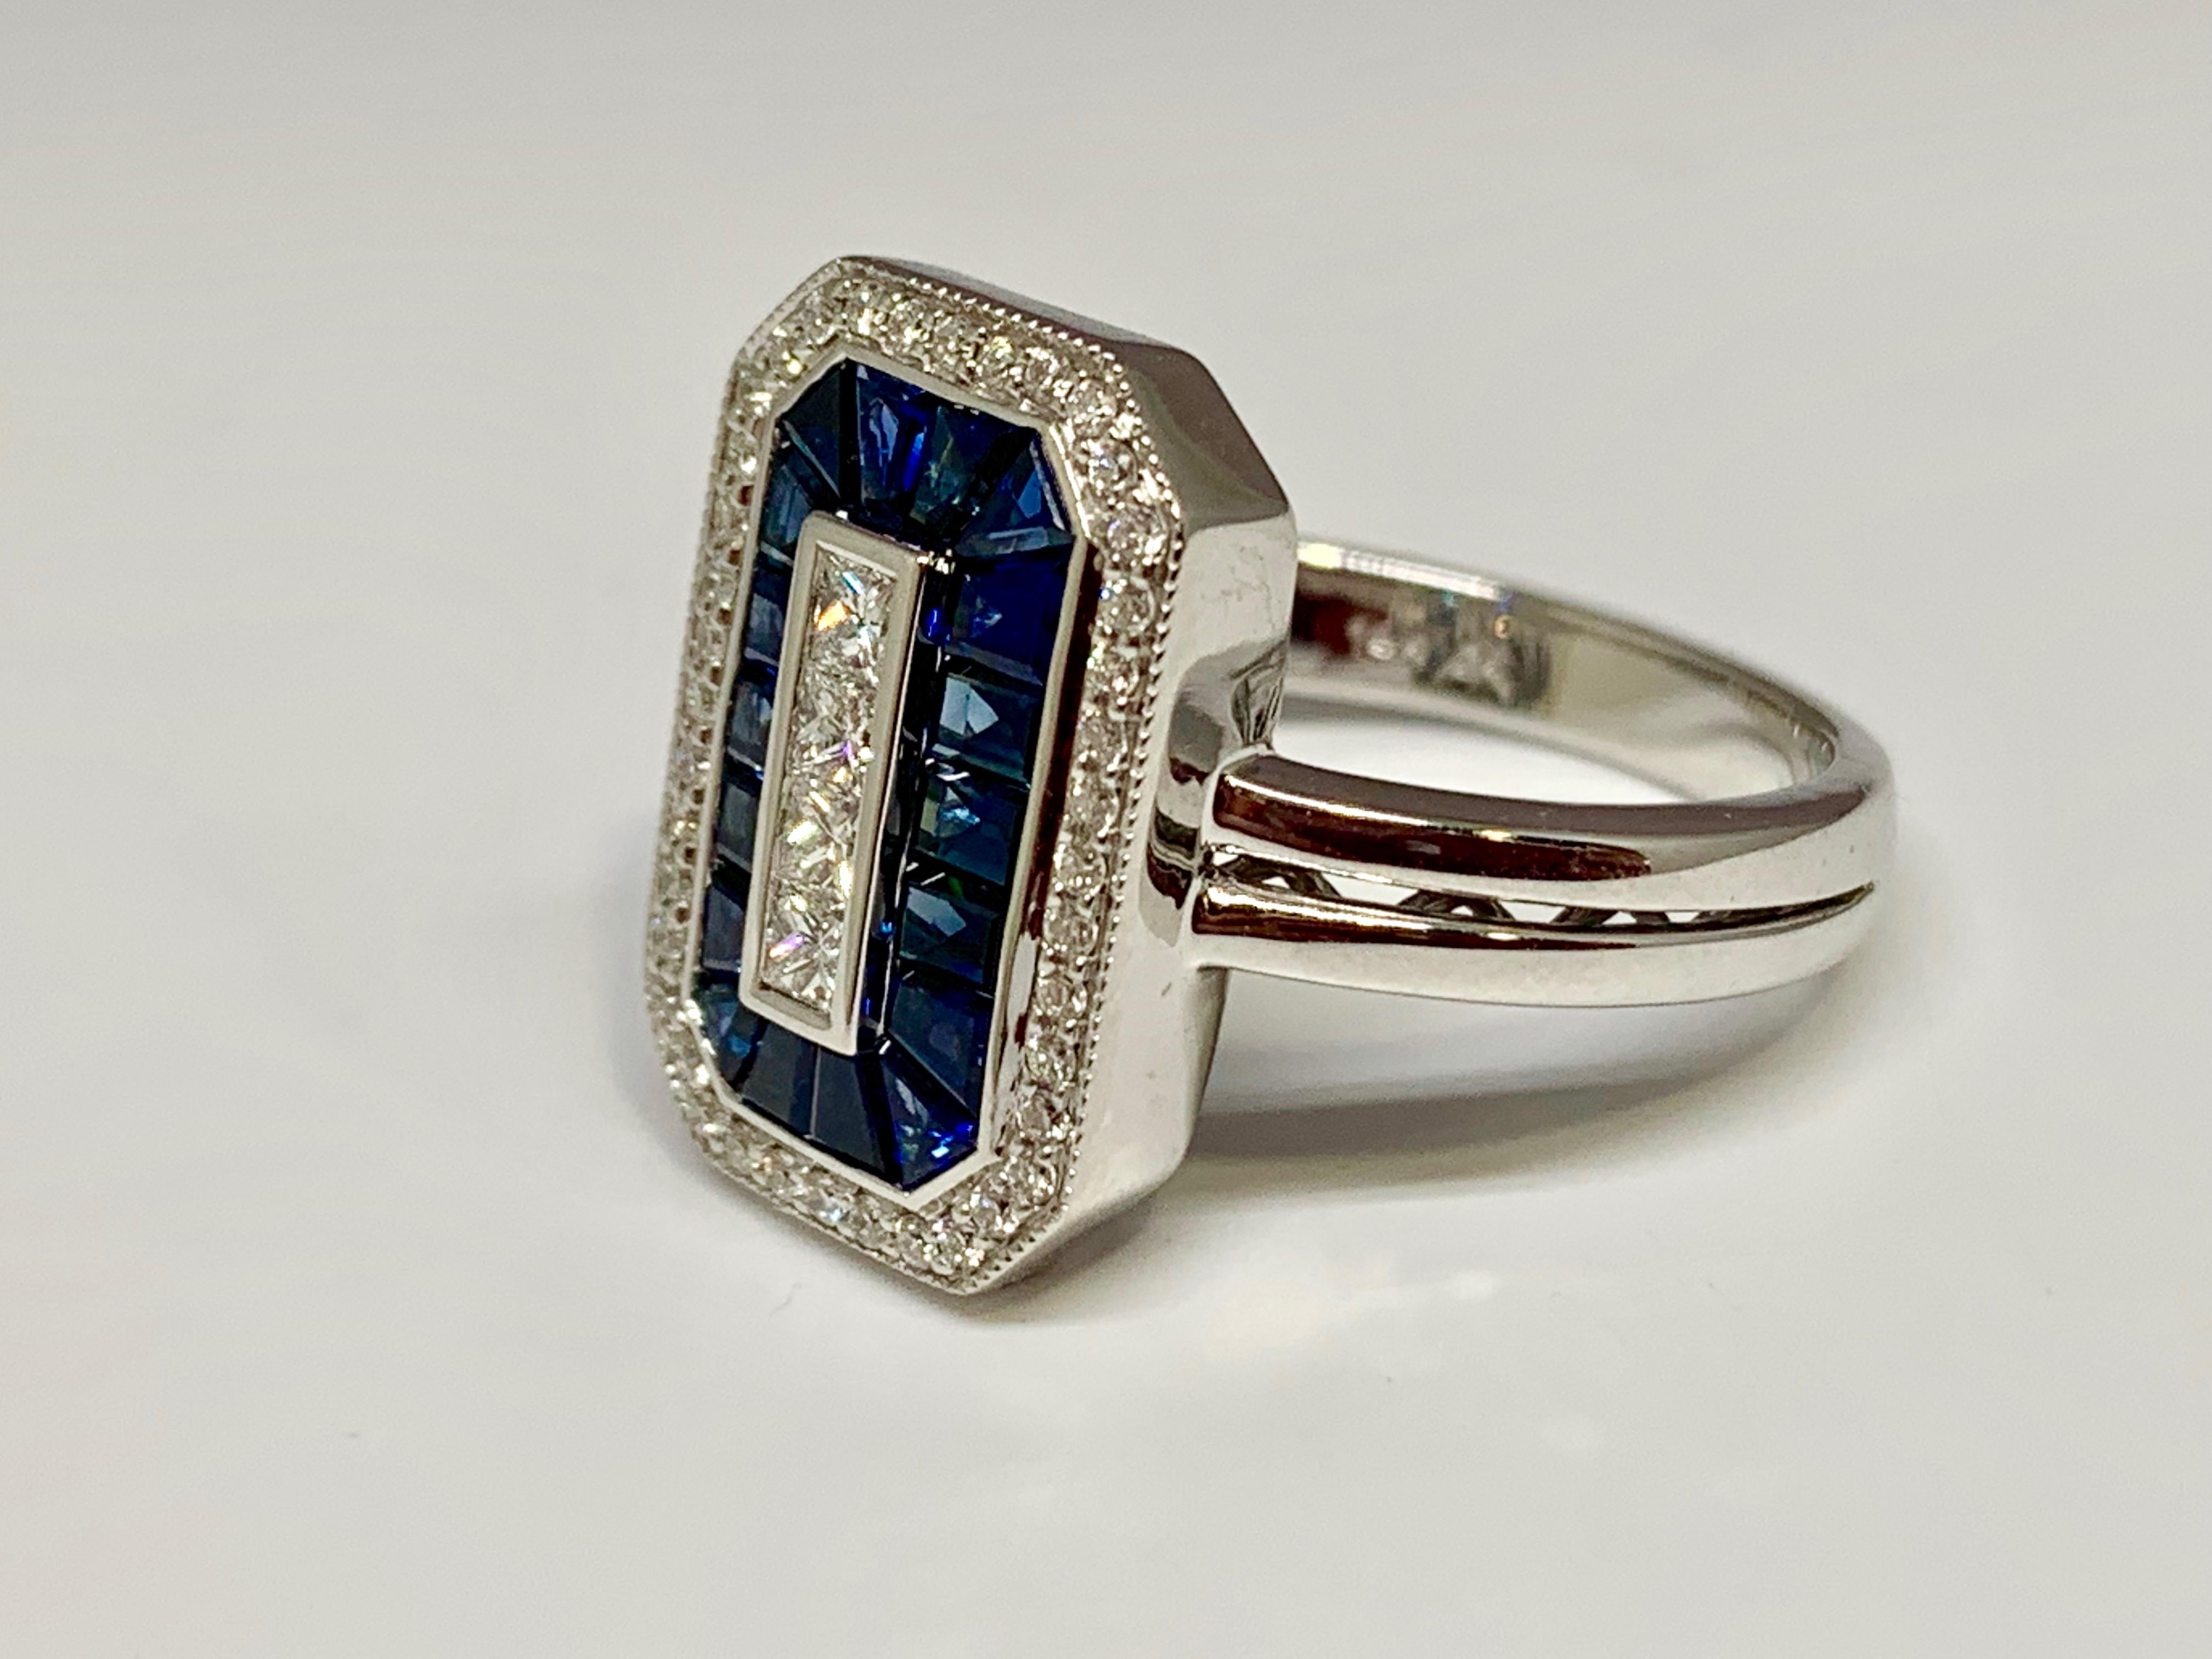 This Allison-Kaufman Company cocktail ring features 1.04 carats of deep blue sapphires and 0.32 carats of gorgeous round and princess cut diamonds. The 14K white gold mounting is currently a size 6.5 but can be resized upon request. The face of the